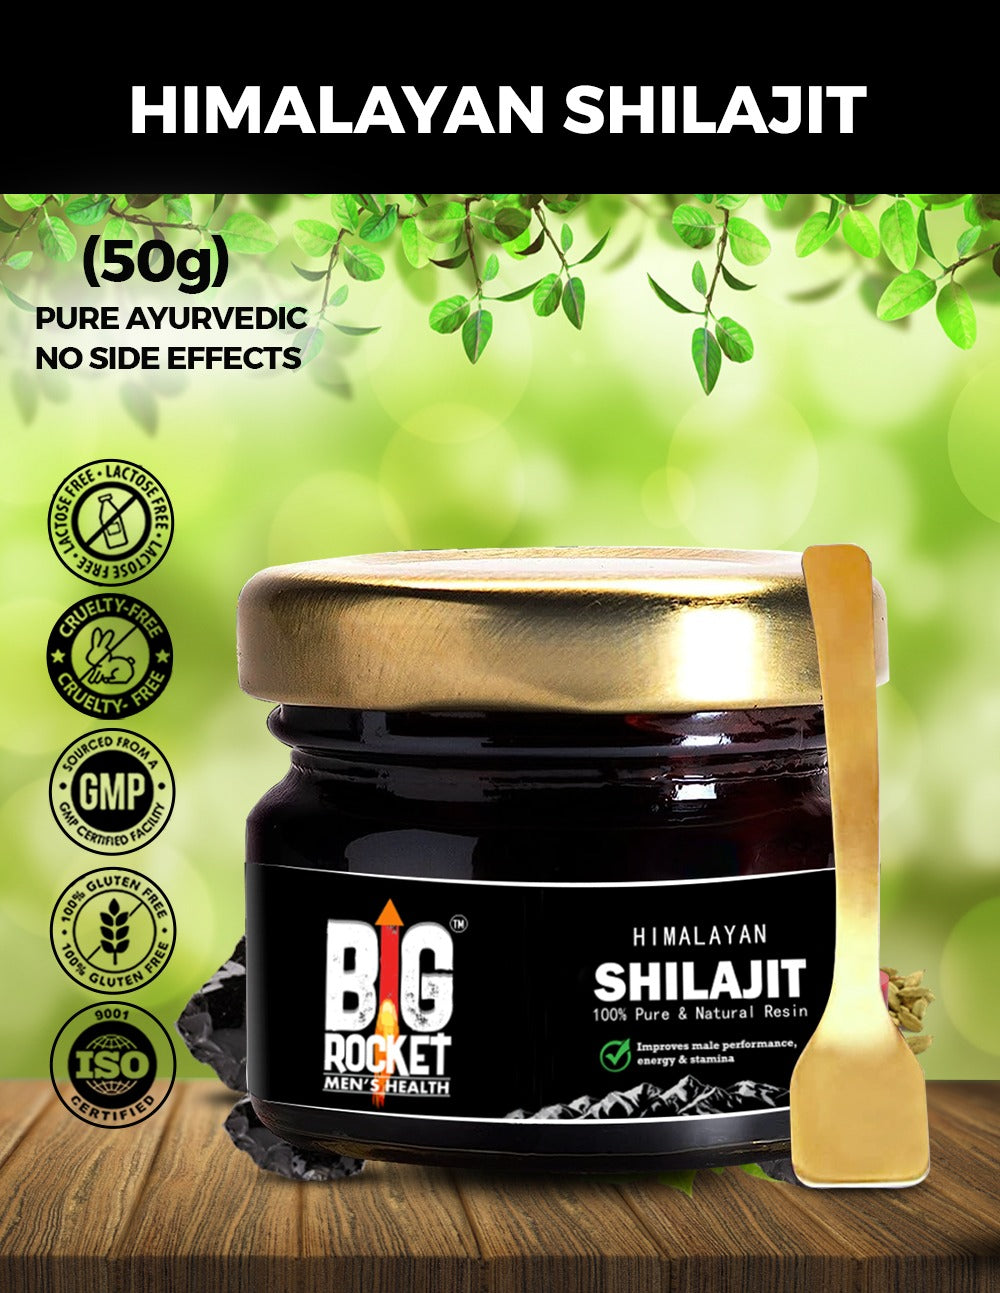 Combo Pack of Size Enlargement - Pure Himalayan Shilajit+Men’s Size Enlargement Capsules+Enlargement Oil